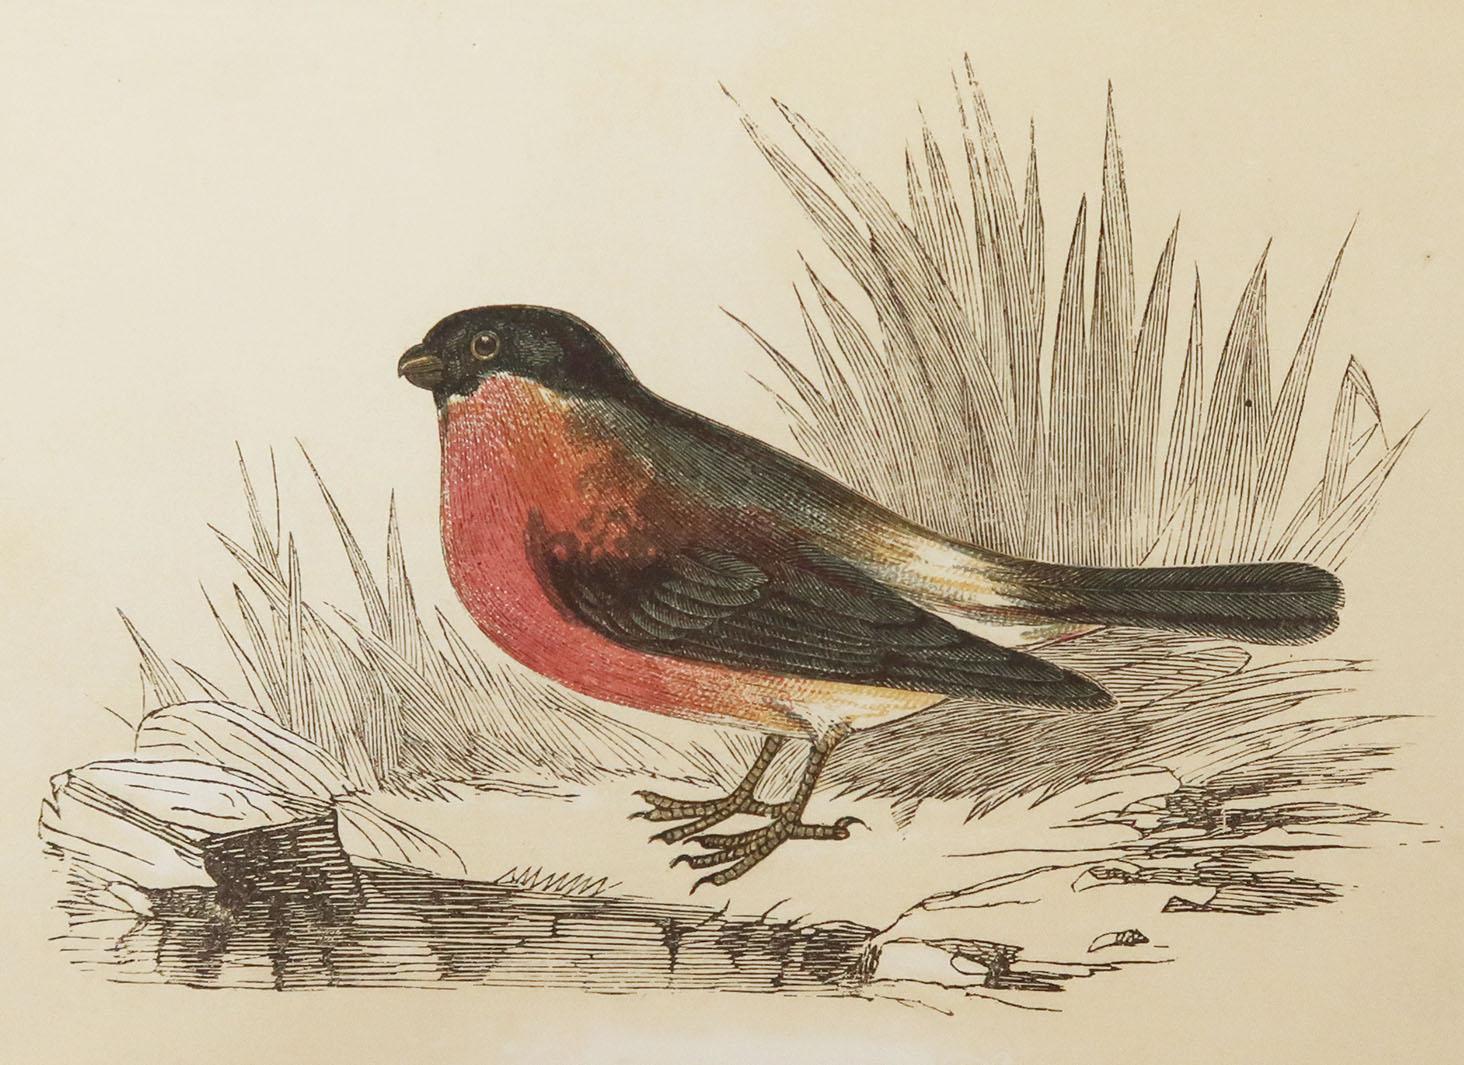 Great image of a bullfinch

Unframed. It gives you the option of perhaps making a set up using your own choice of frames.

Lithograph with original color.

Published by Tallis circa 1850

Crudely inscribed title has been erased at the bottom